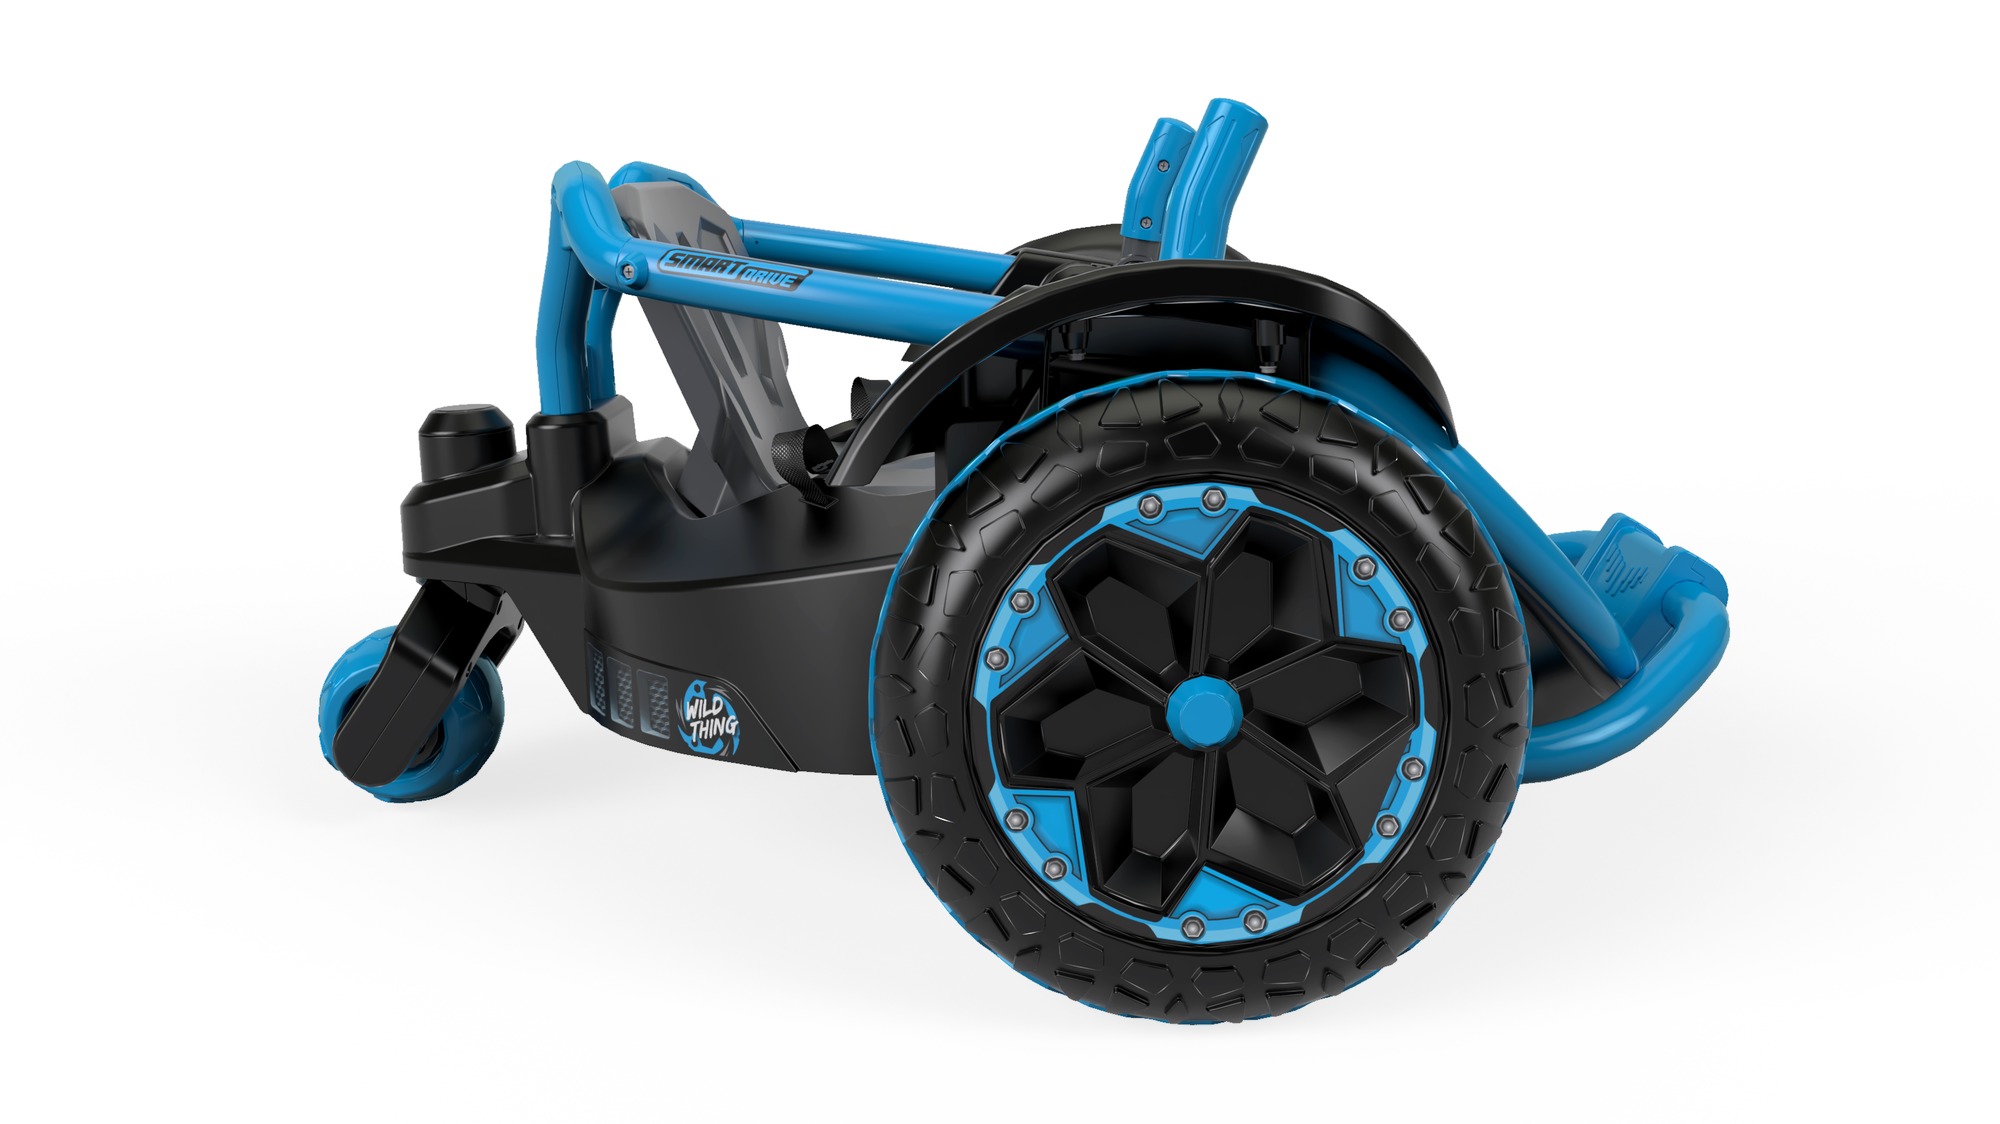 Power Wheels Wild Thing 360 Spinning Ride-On Vehicle, Blue, 12V - image 5 of 10